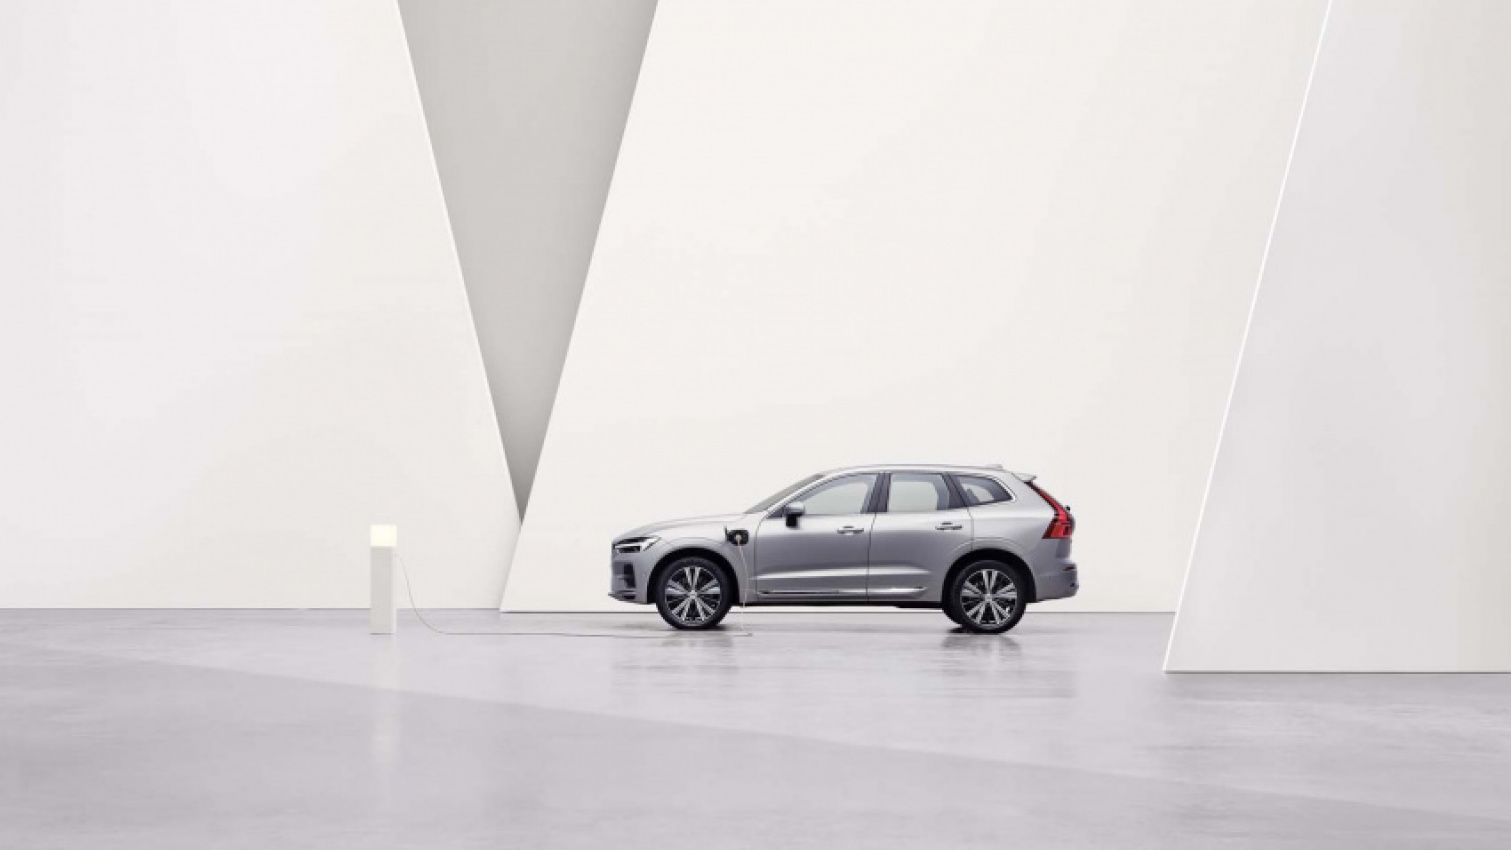 cars, hybrid cars, volvo, hybrids, plug-in hybrids, volvo news, with bigger battery, volvo plug-in hybrids may soon go up to 41 electric miles